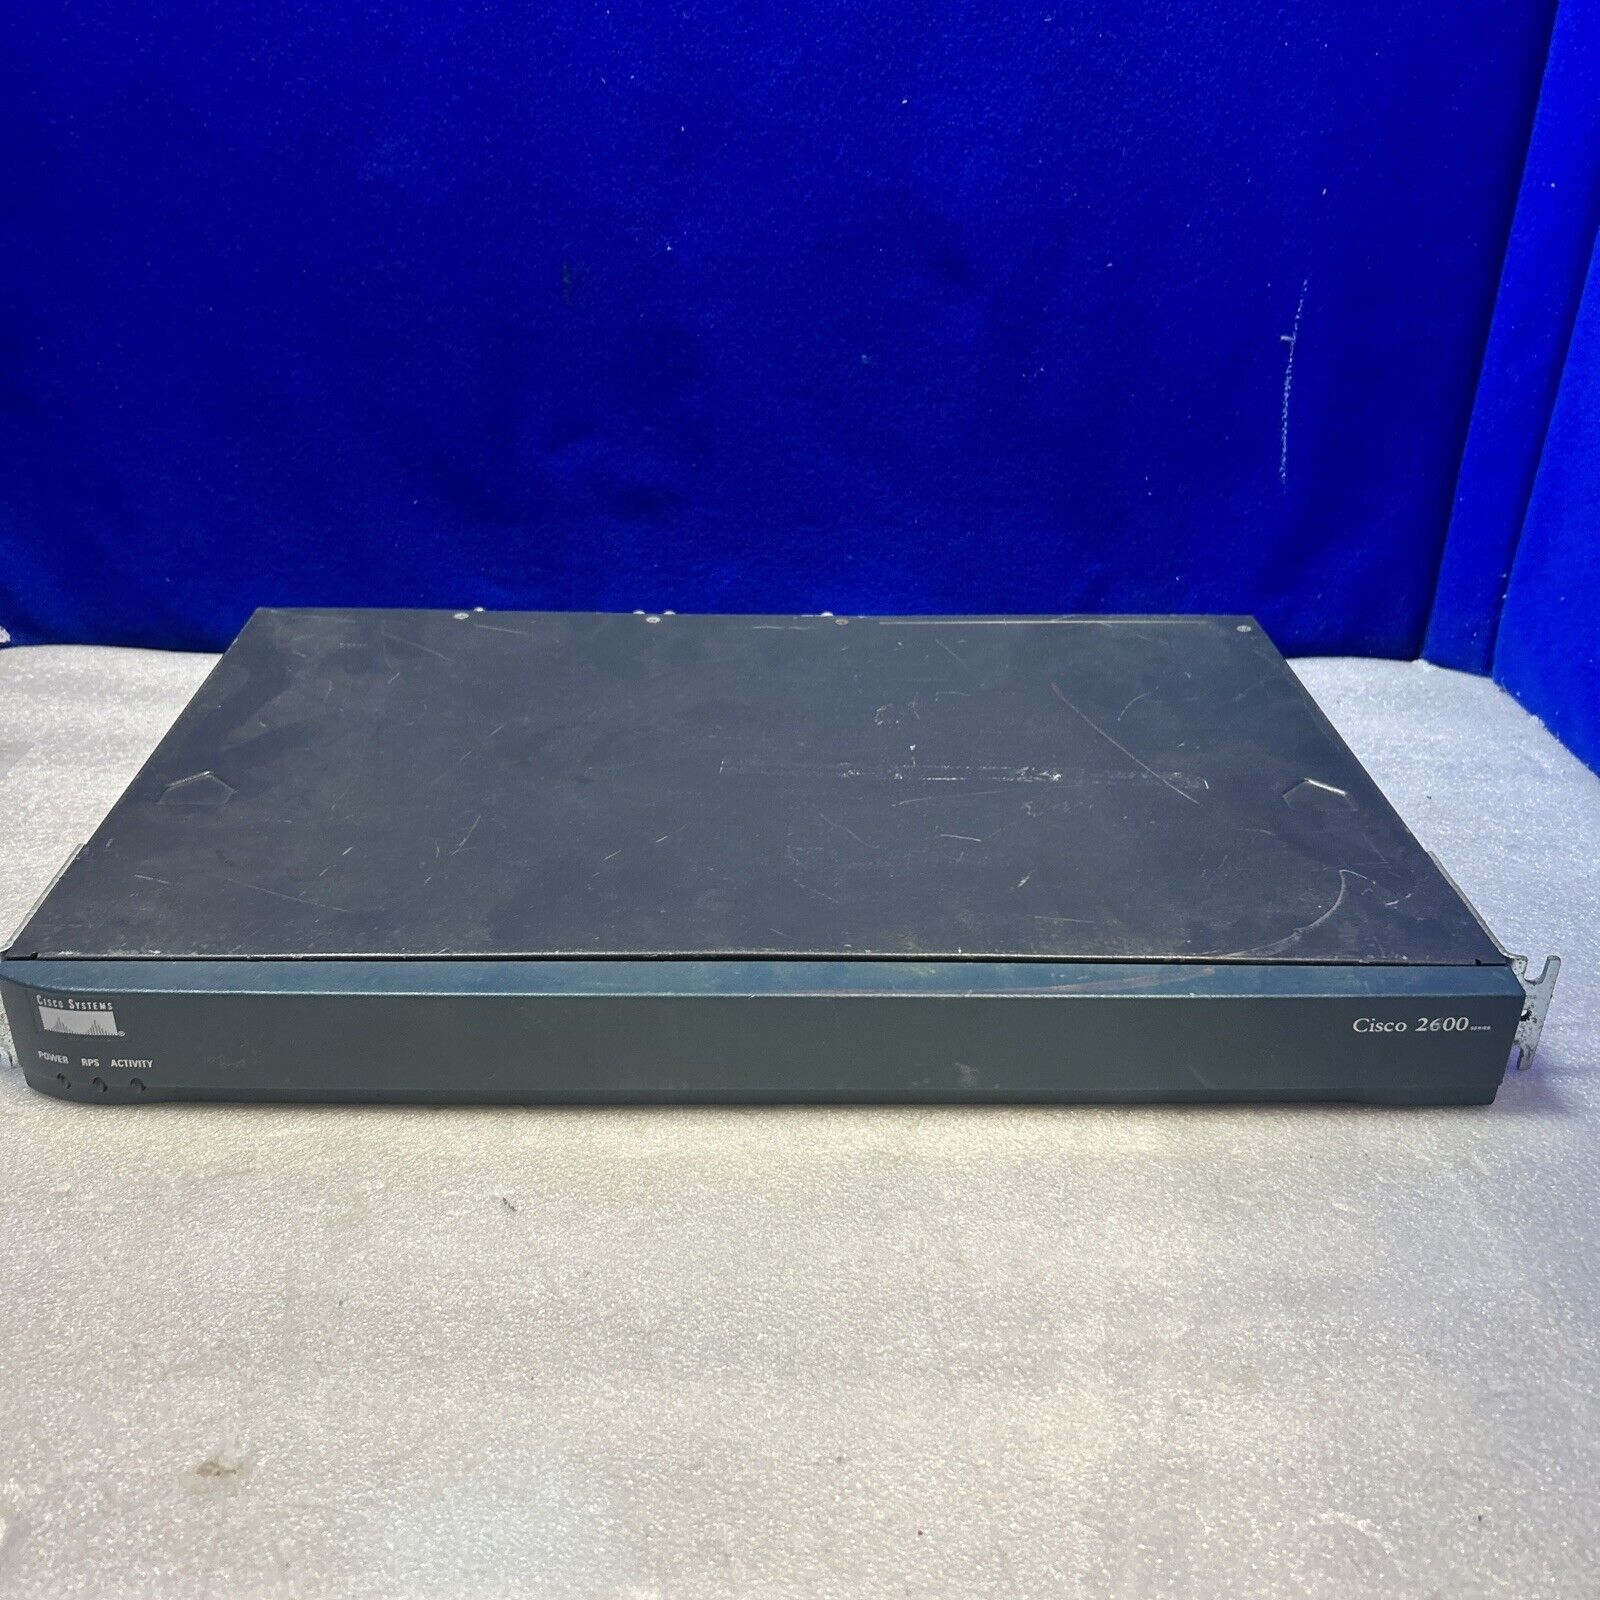 Cisco 2600 2620XM Series Modular Access Router - PLEASE CHECK PICTURES - AS IS